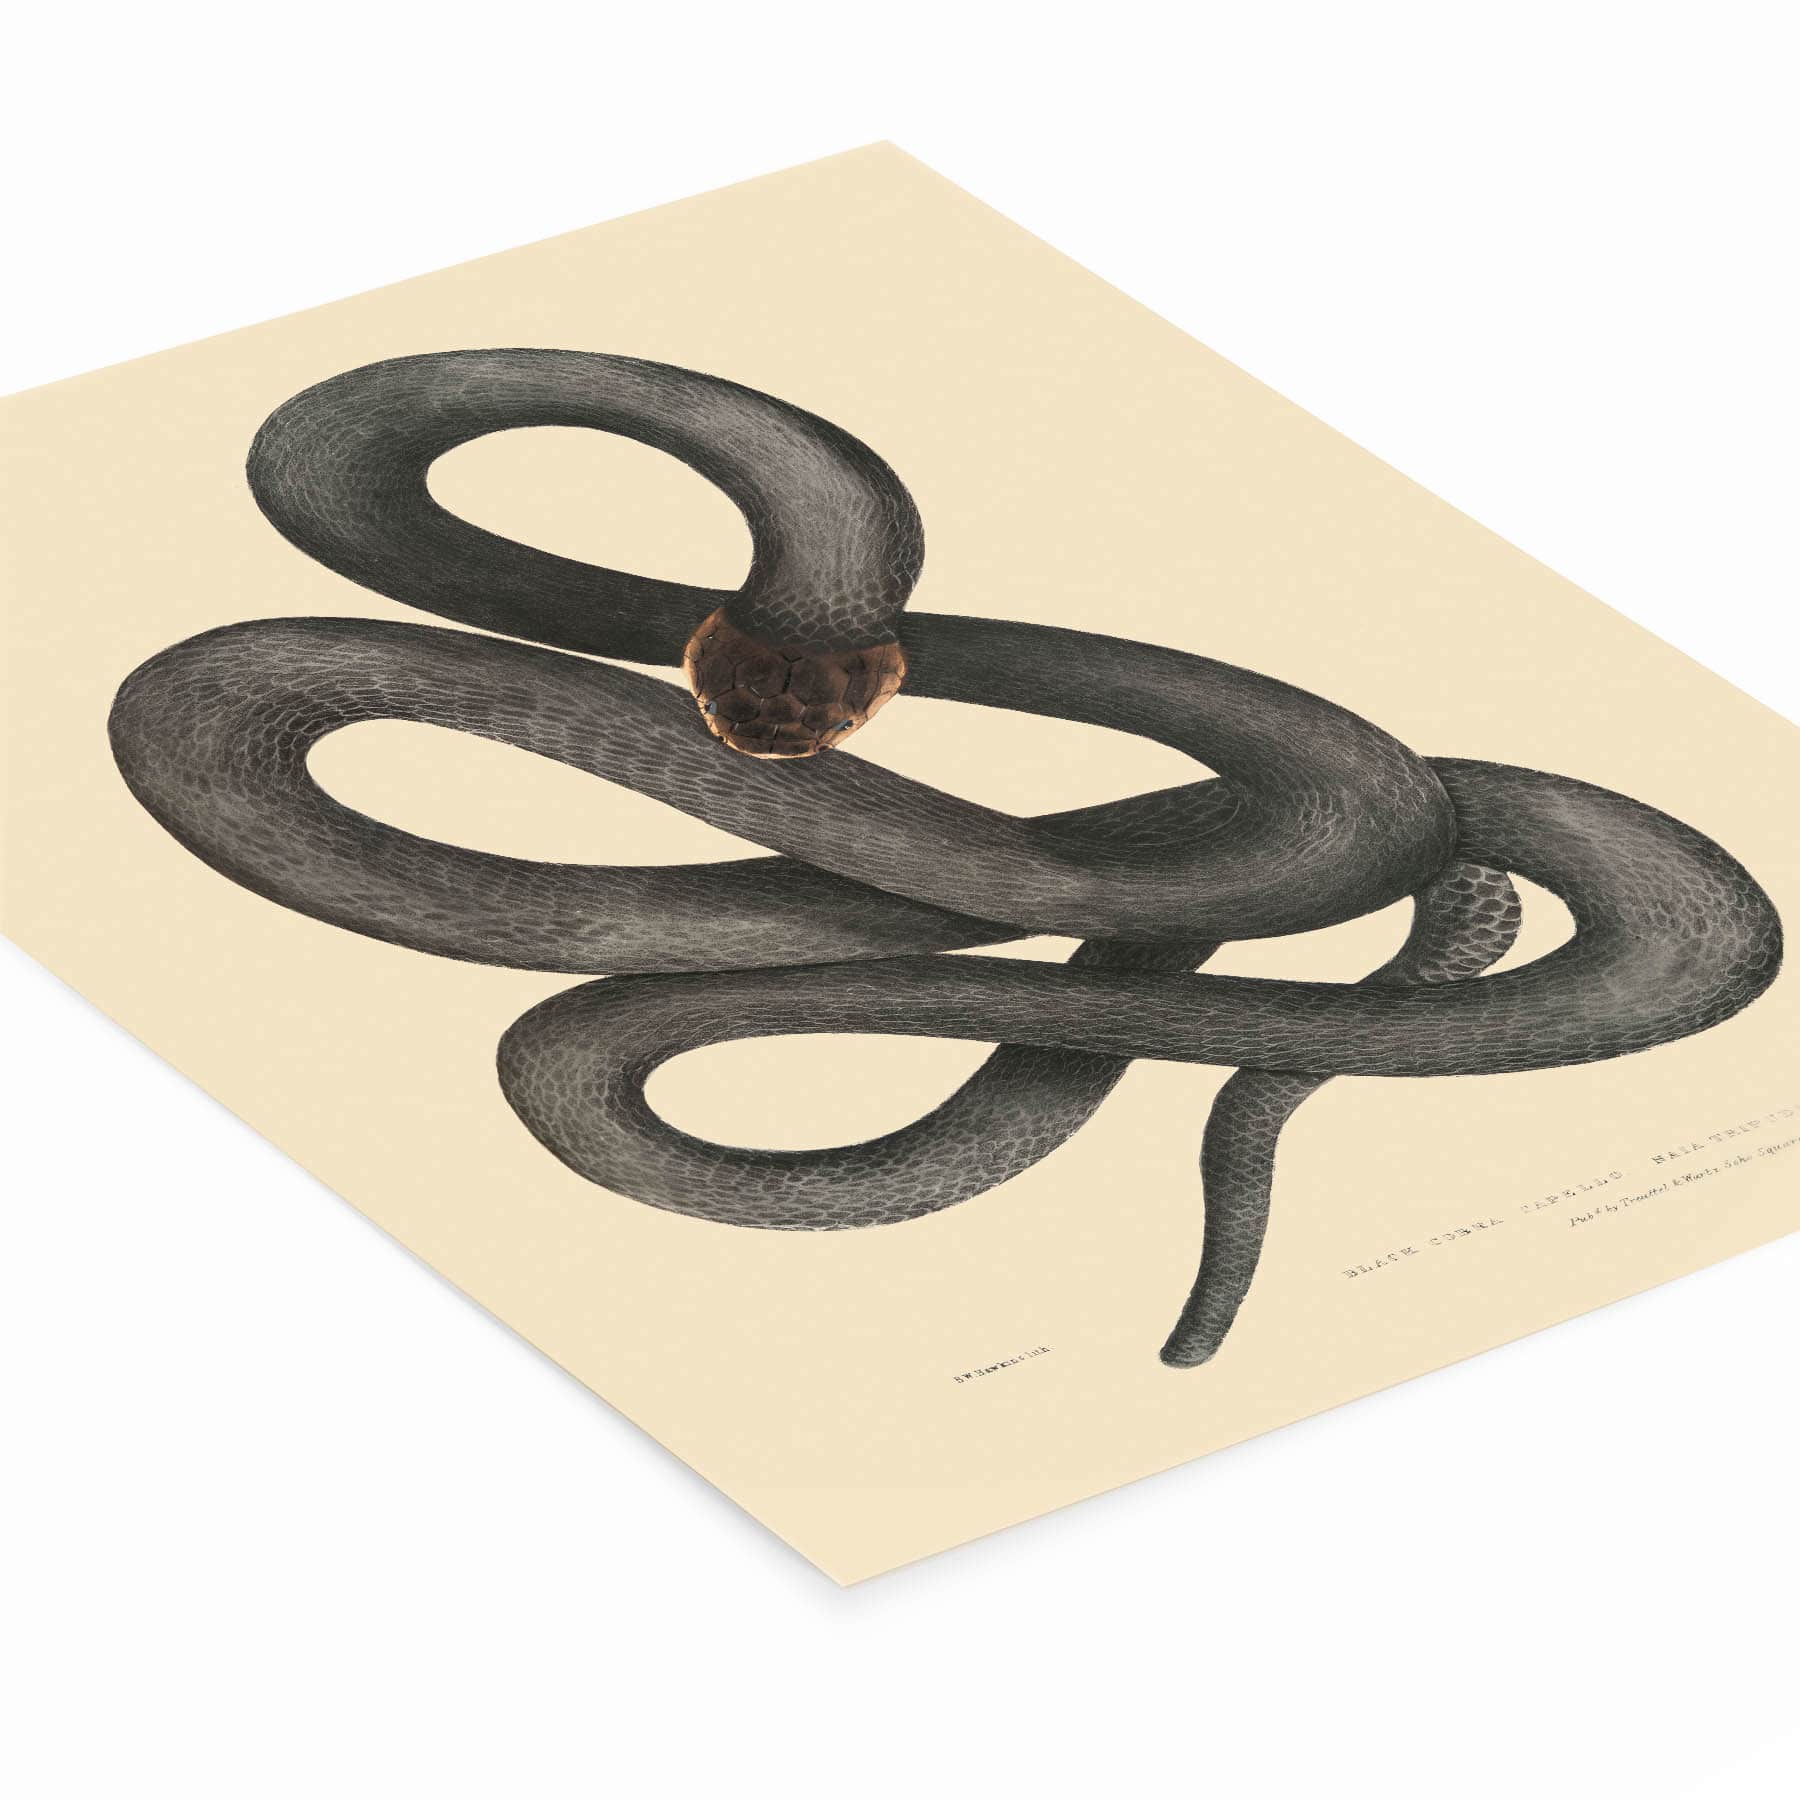 Cool Snake Art Print Laying Flat on a White Background